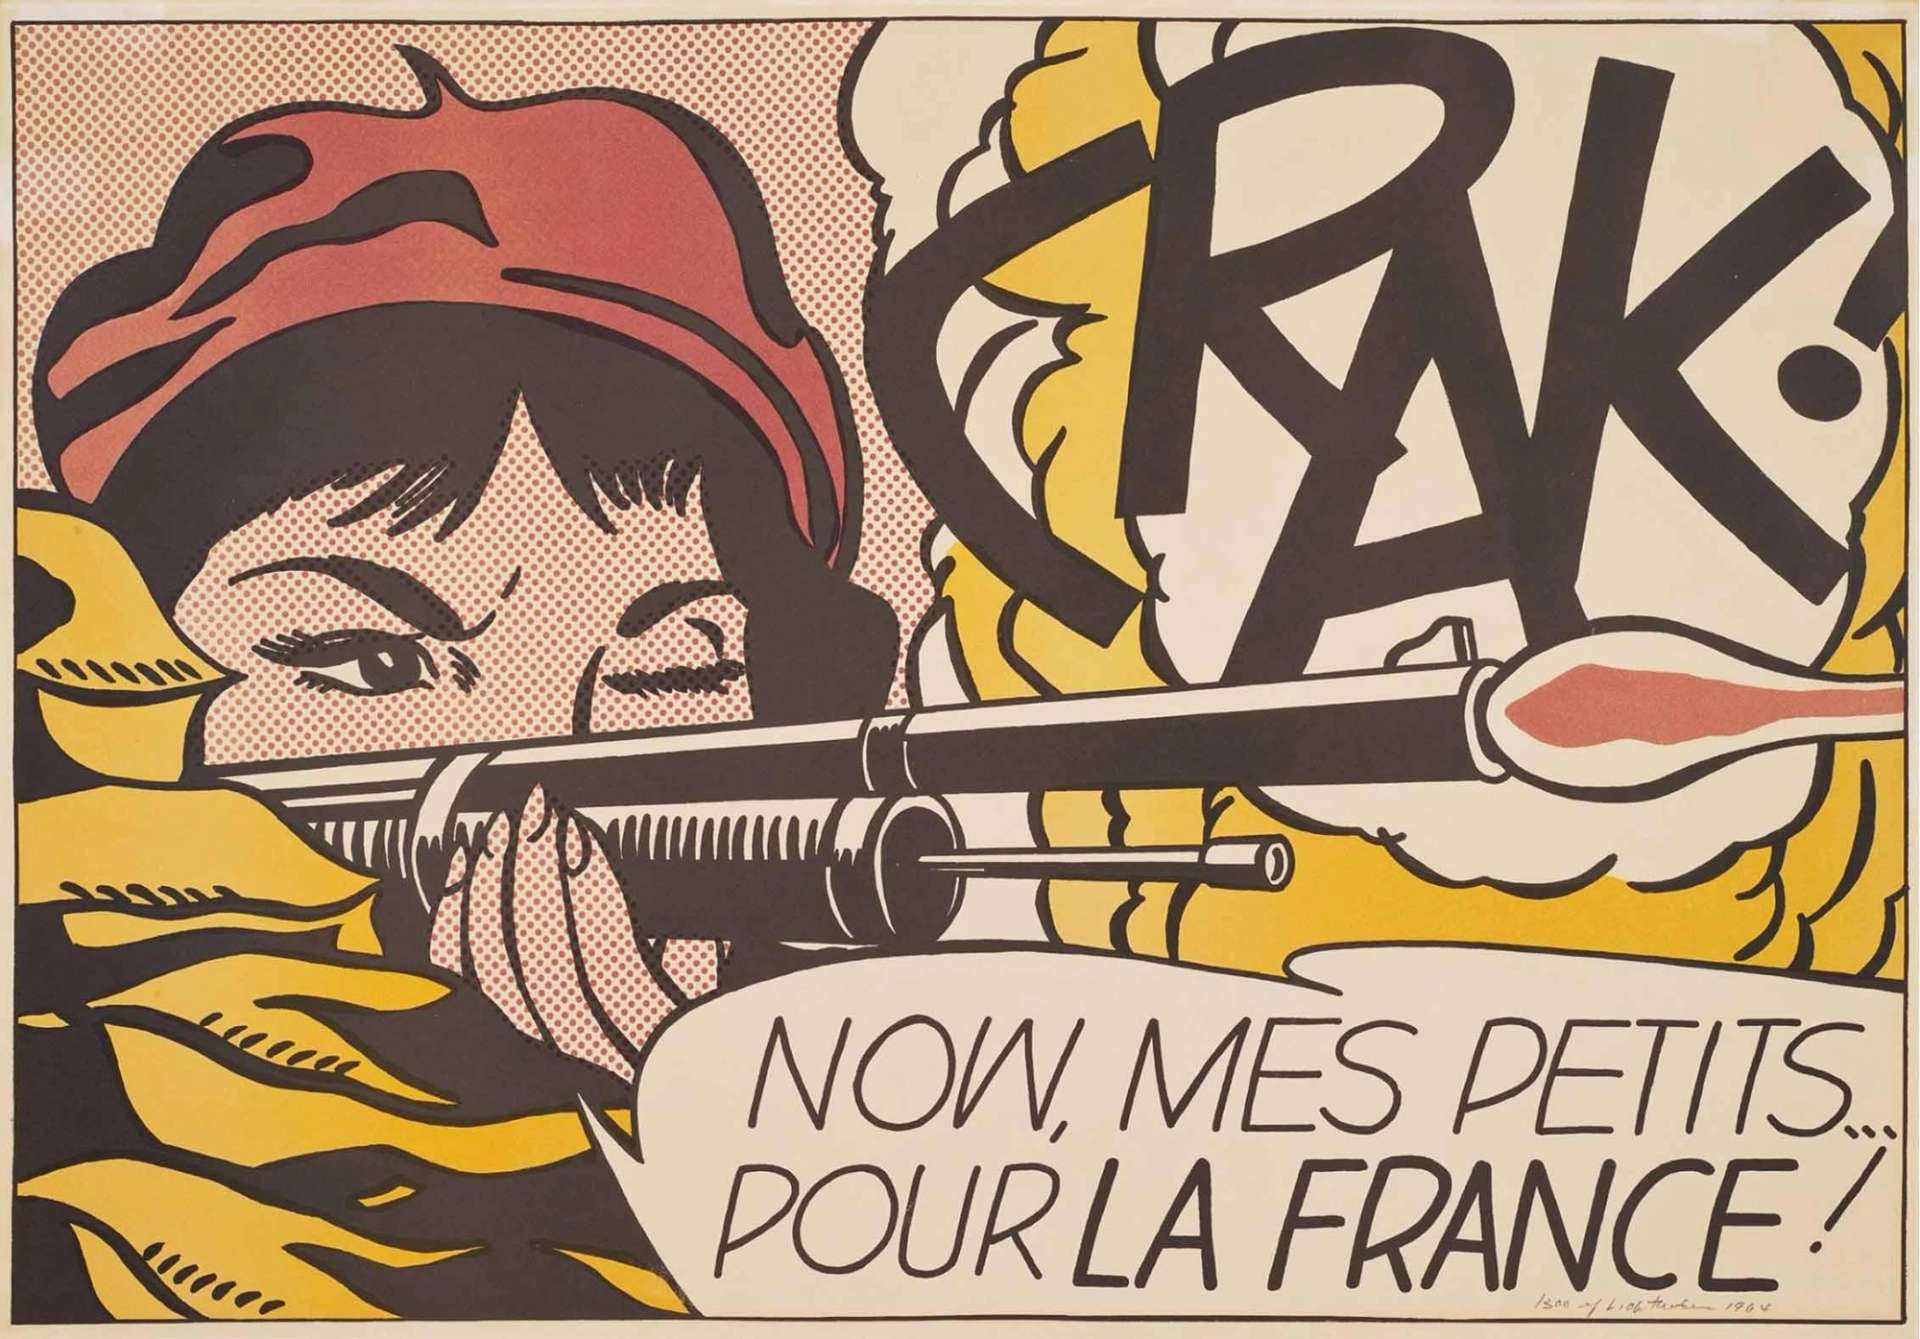 A screenprint by Roy Lichtenstein appropriating a comic book scene, showing a woman to the left of the composition firing a gun with graphic words inscribed across the work.